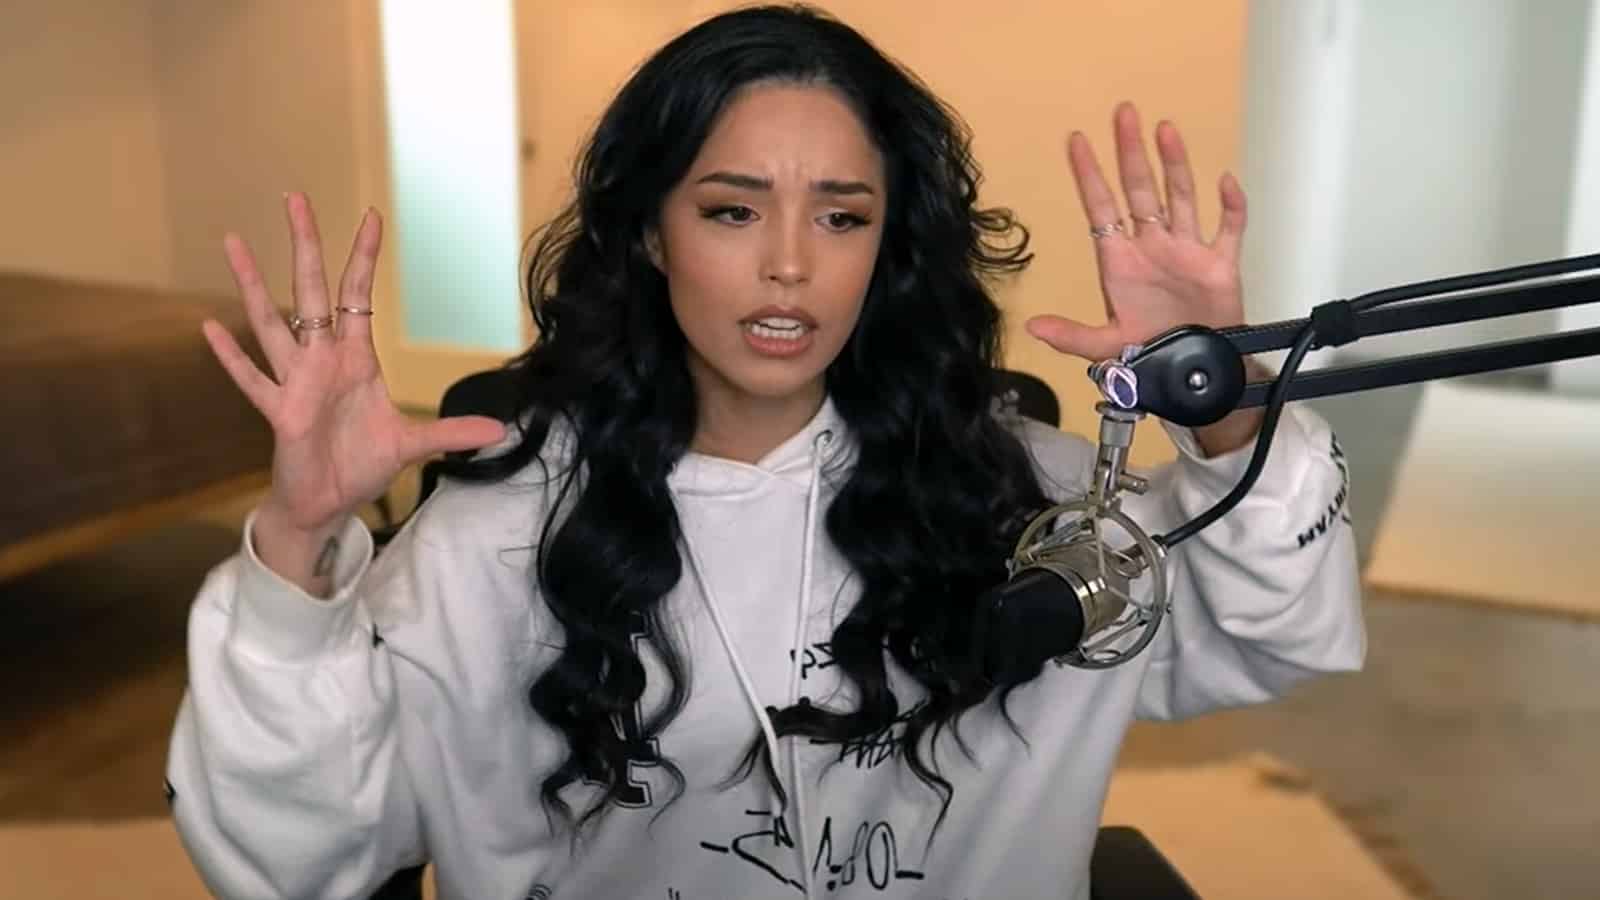 Valkyrae streaming on YouTube with her hands up in the air